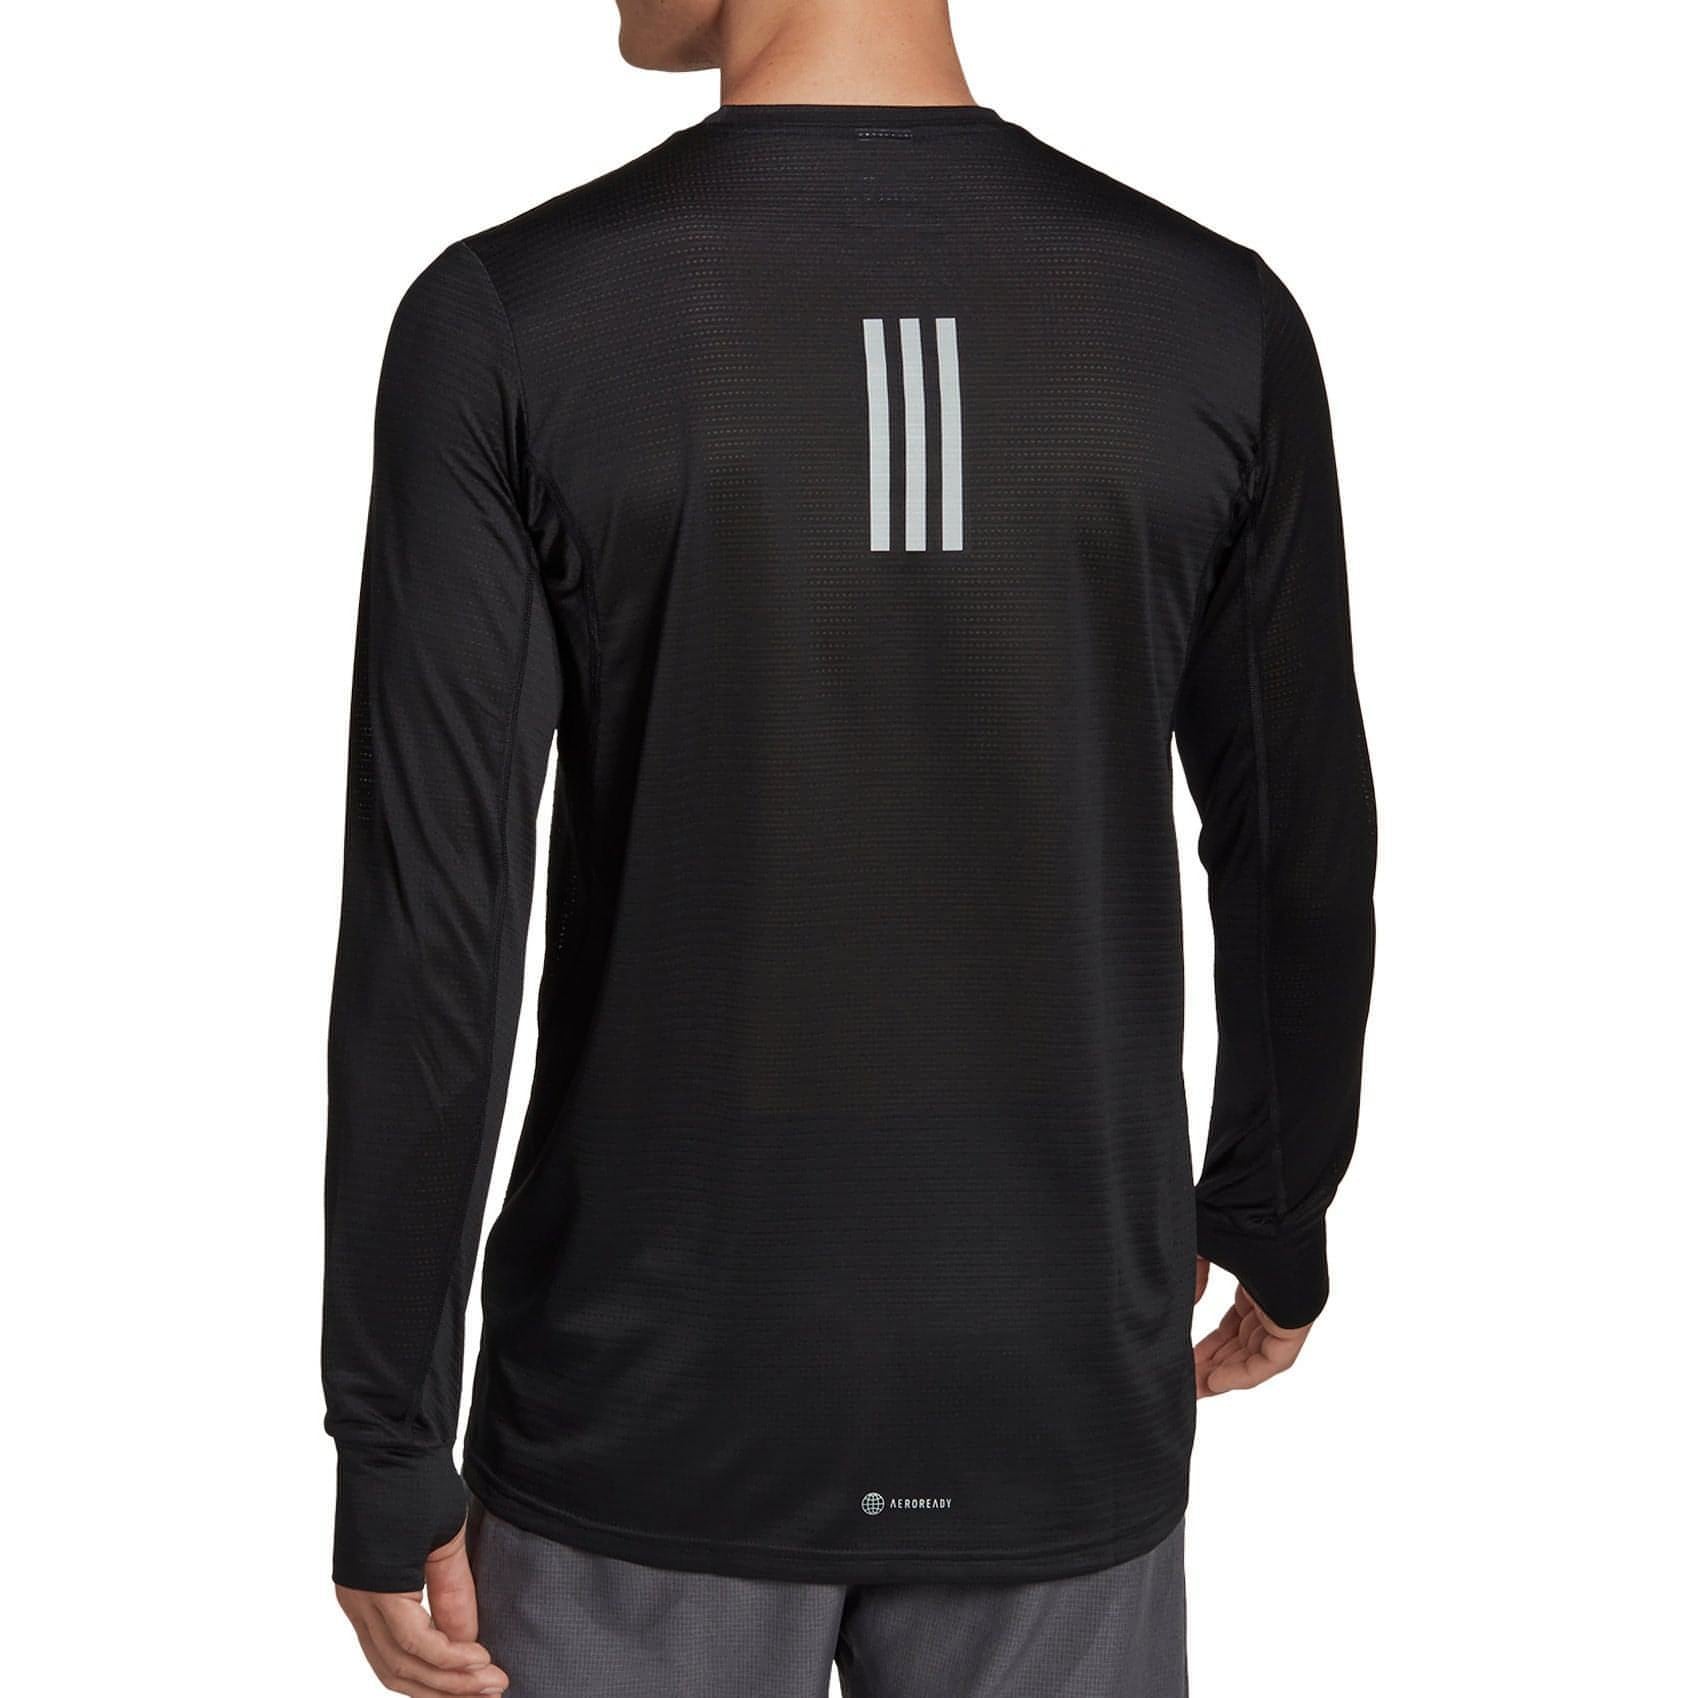 Adidas Own The Run Long Sleeve Hm8436 Back View